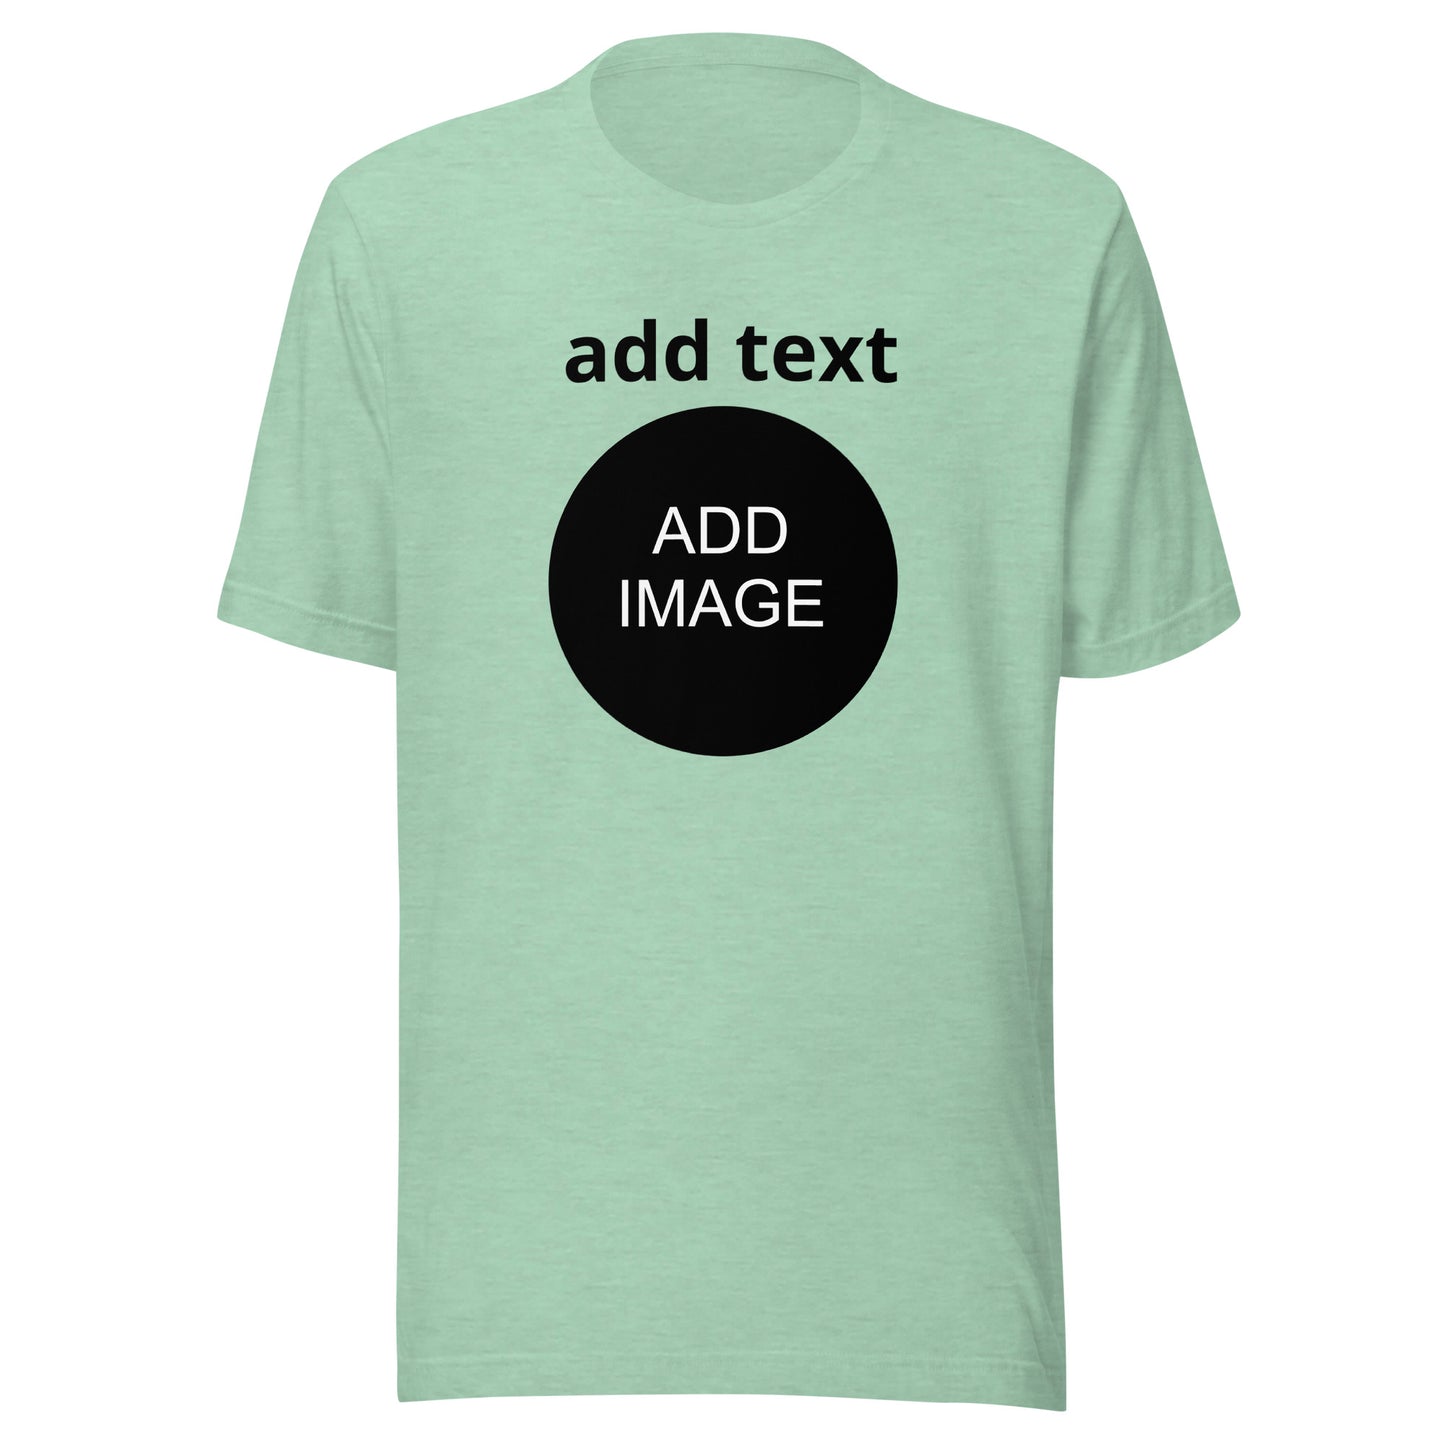 Small - Medium Unisex [front image and front black text]